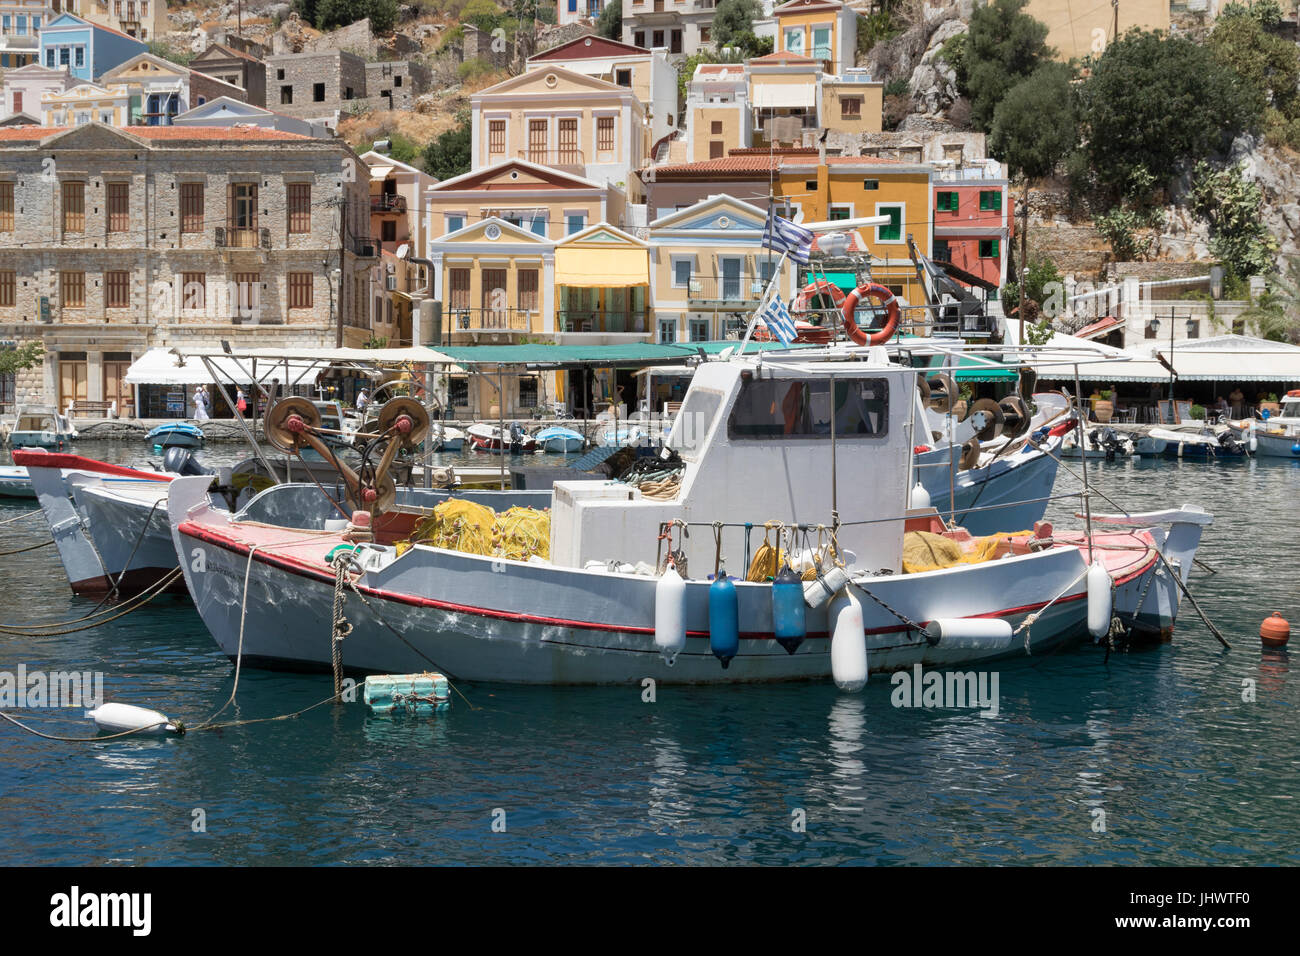 Symi Island, South Aegean, Greece - fishing boats in the harbour at the main town / port, Gialos (or Yialos, as it is also known) Stock Photo